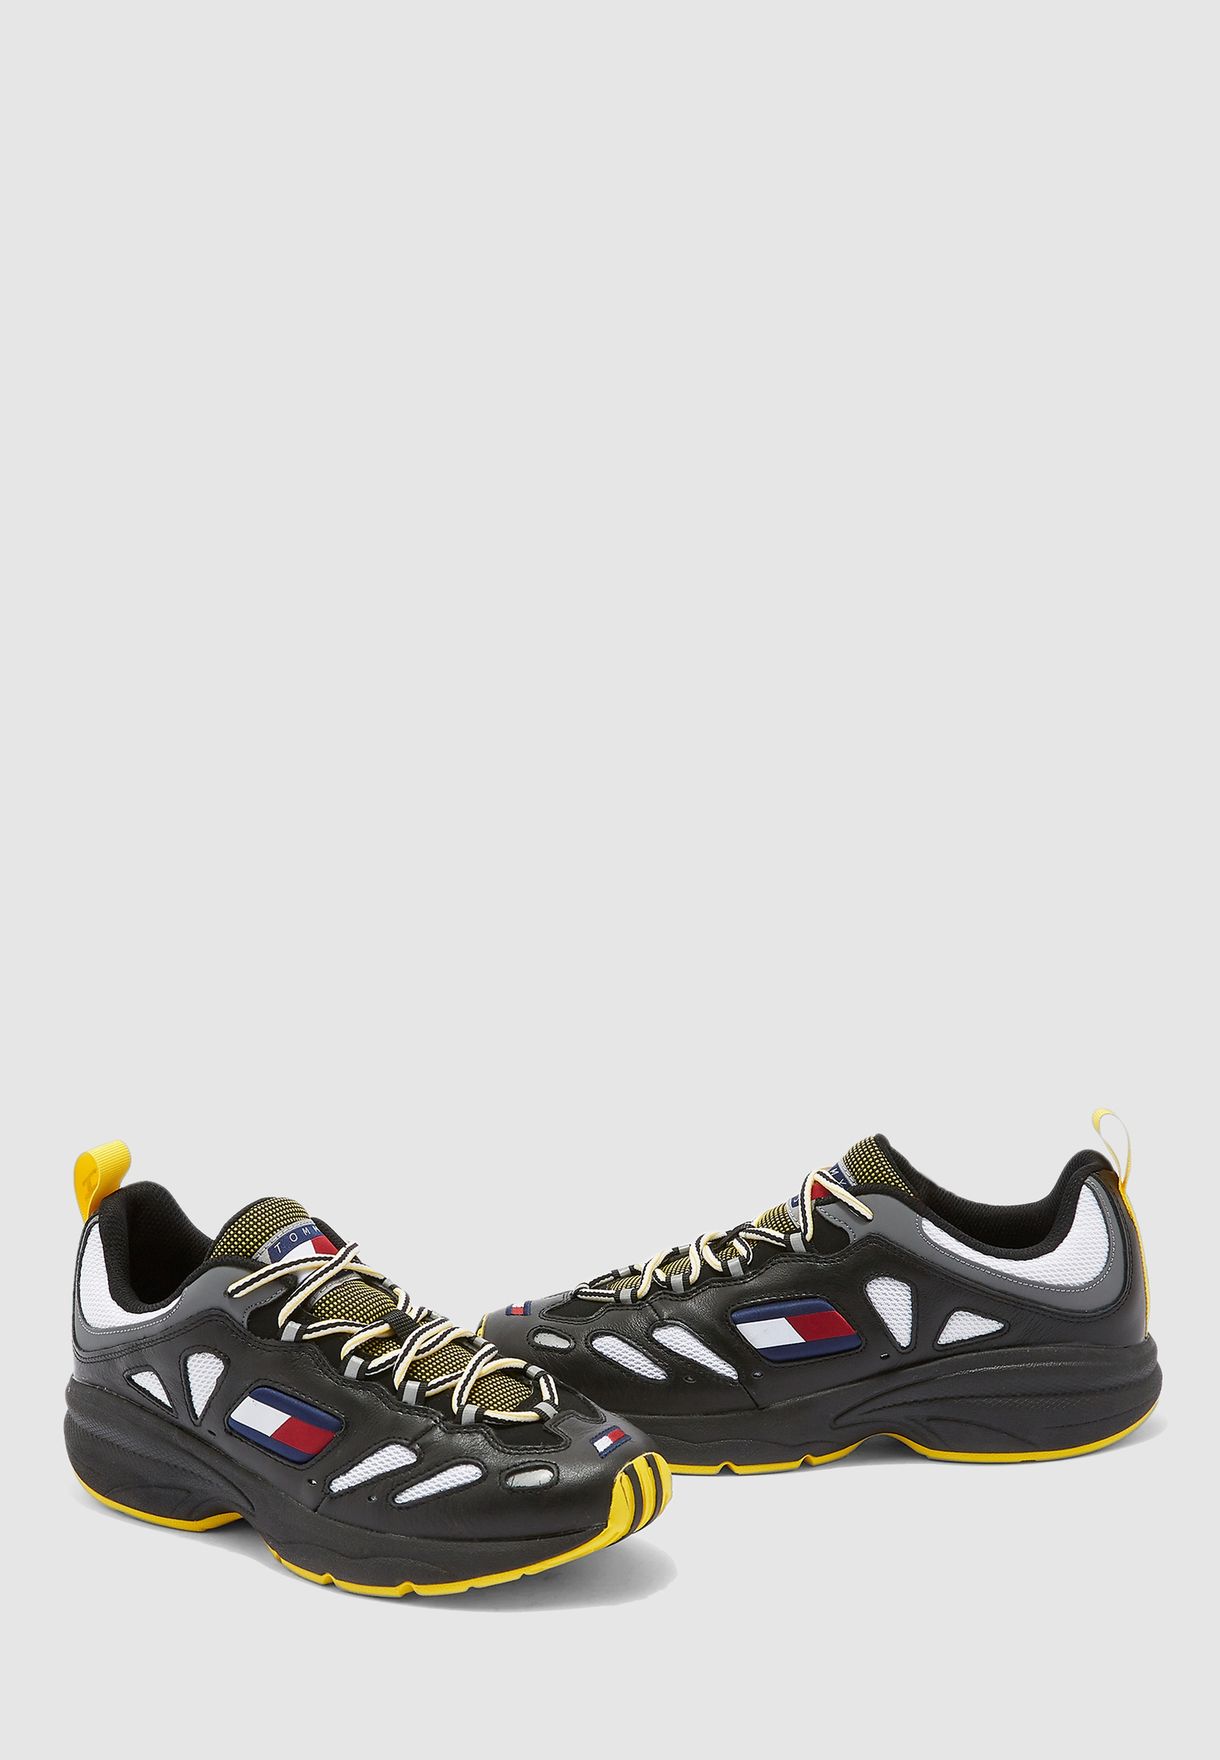 tommy hilfiger classic sneakers